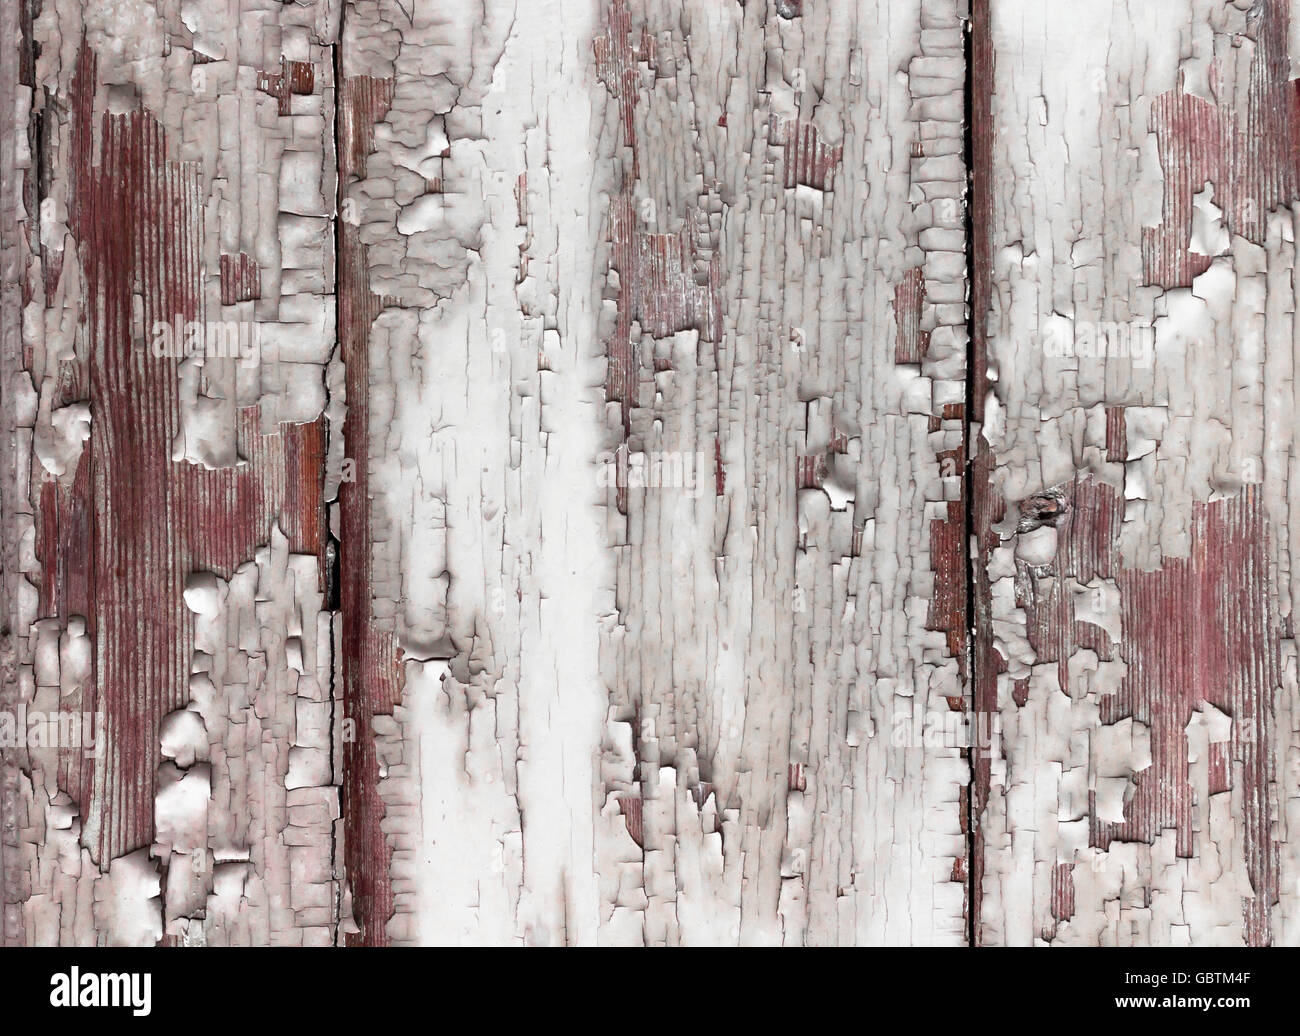 Background of old board with peeling white paint Stock Photo